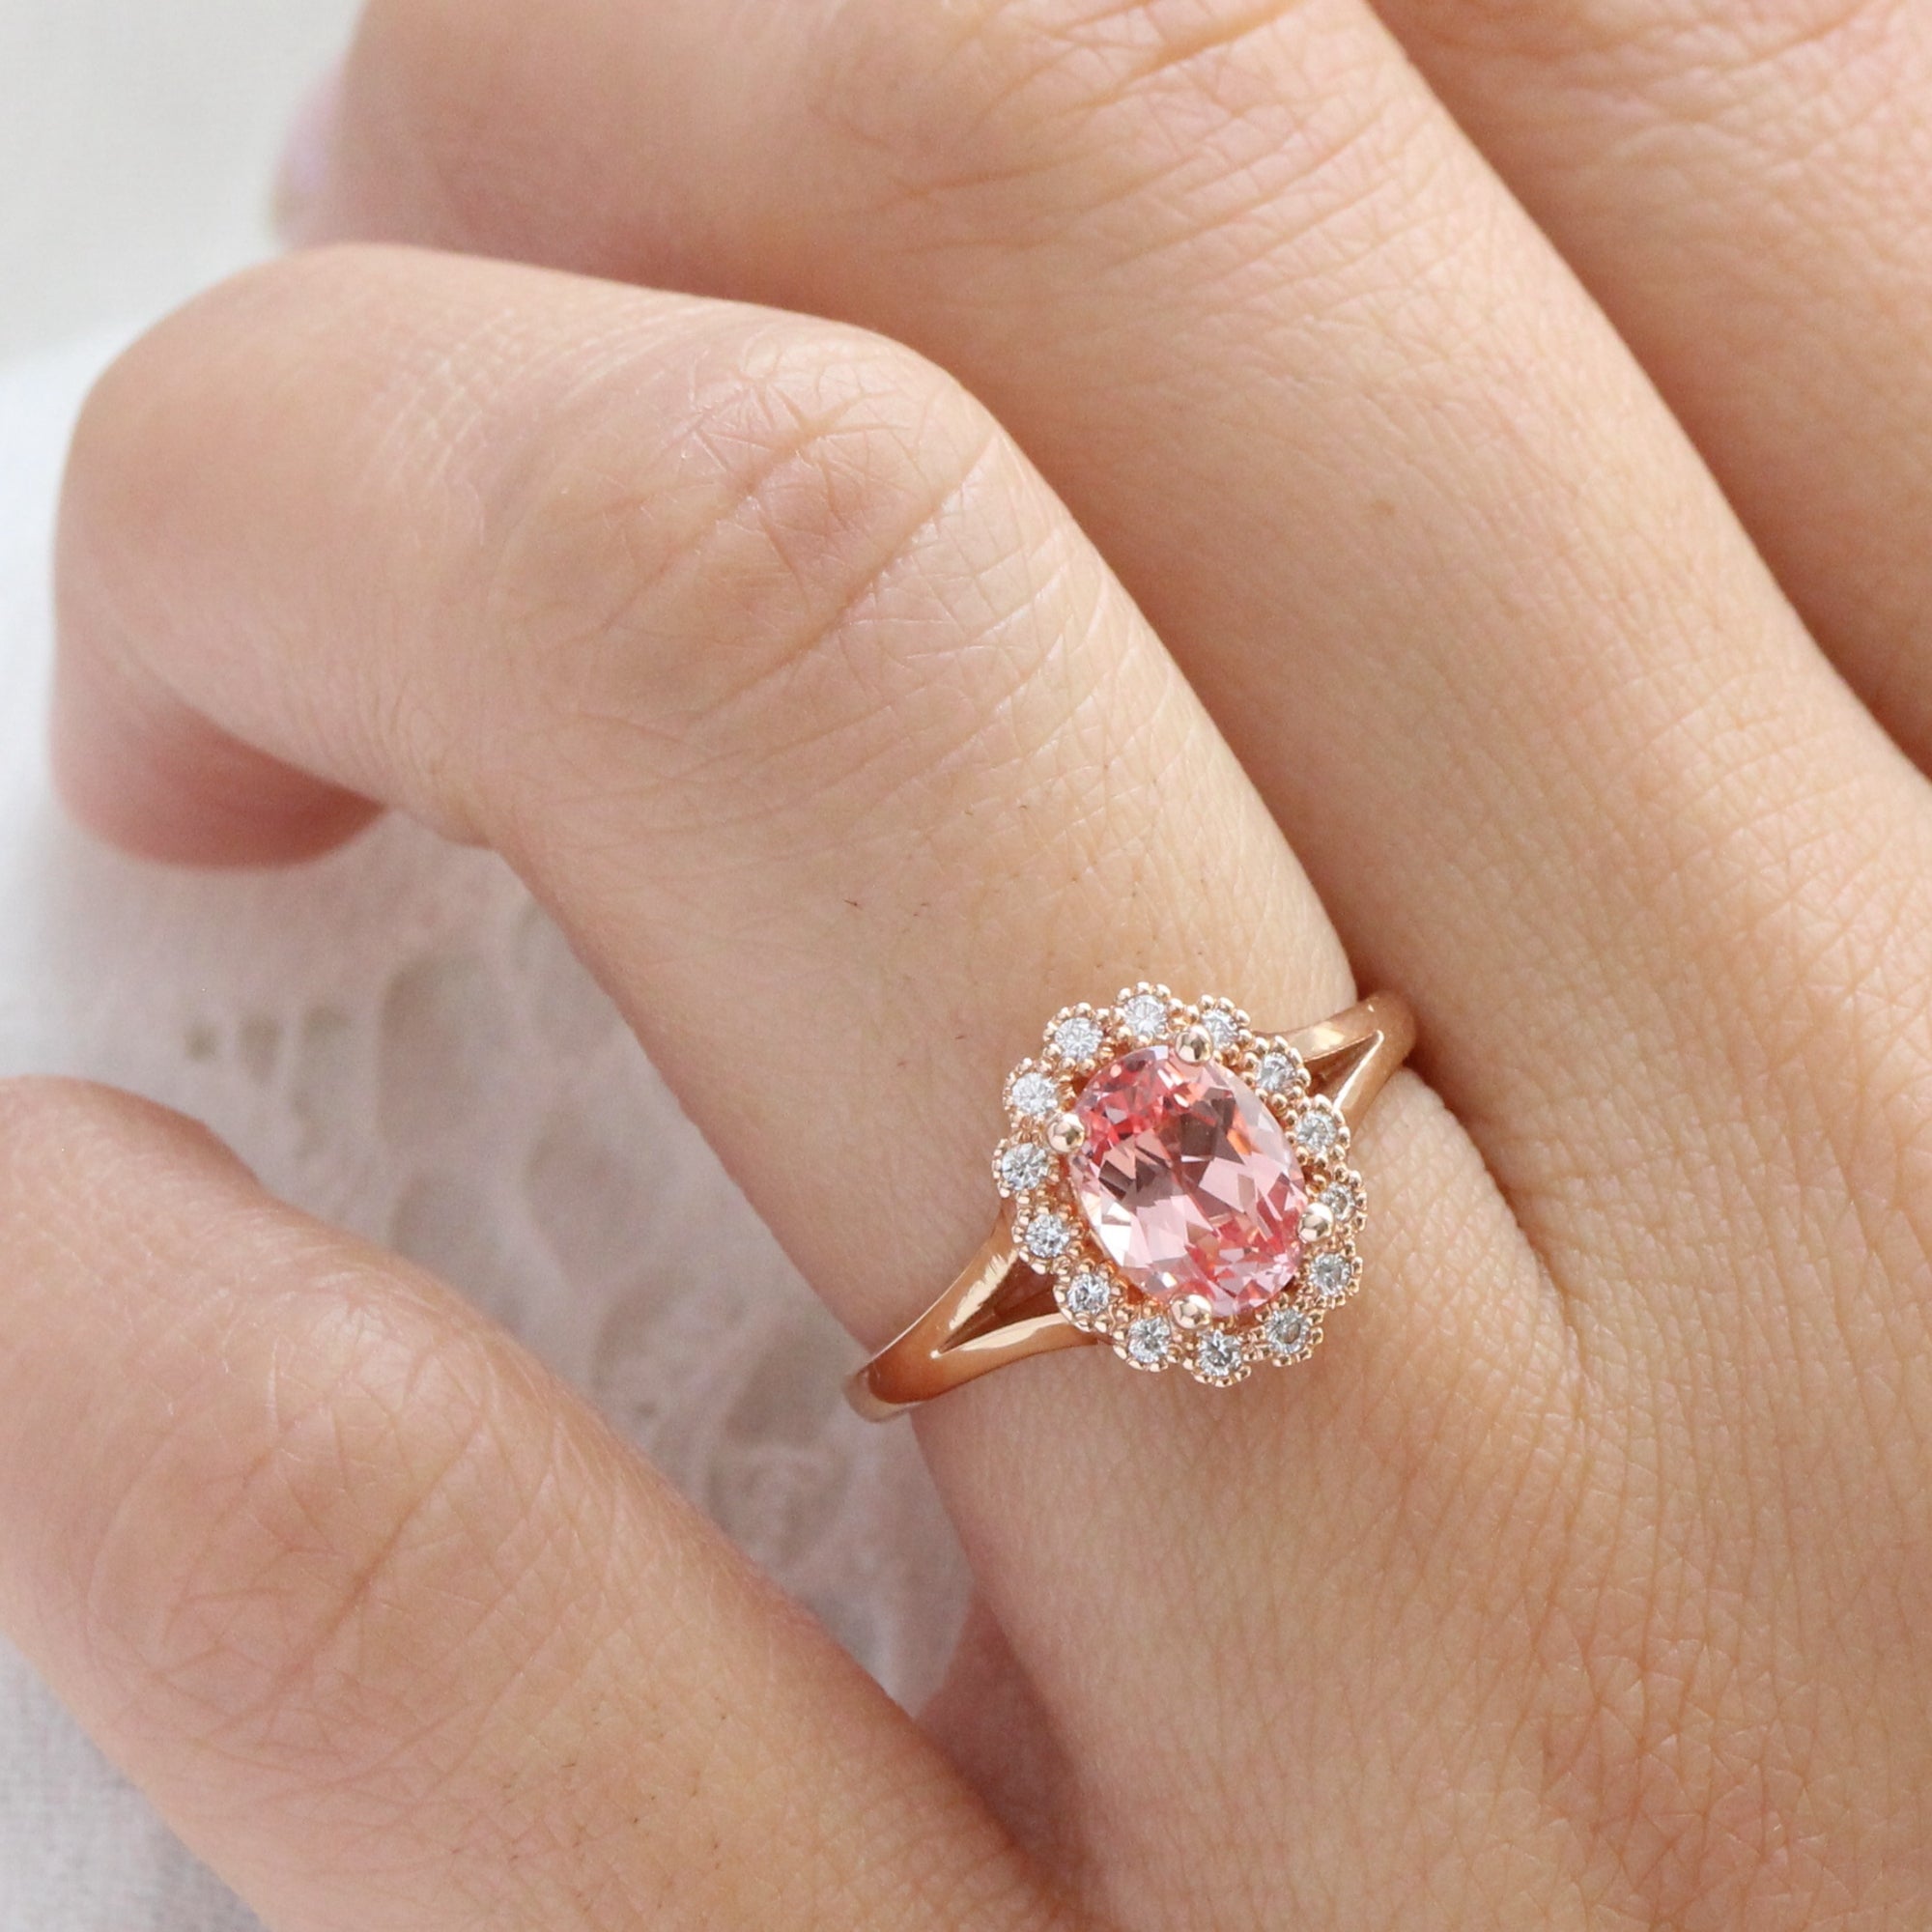 oval peach sapphire engagement ring in rose gold halo diamond band by la more design jewelry